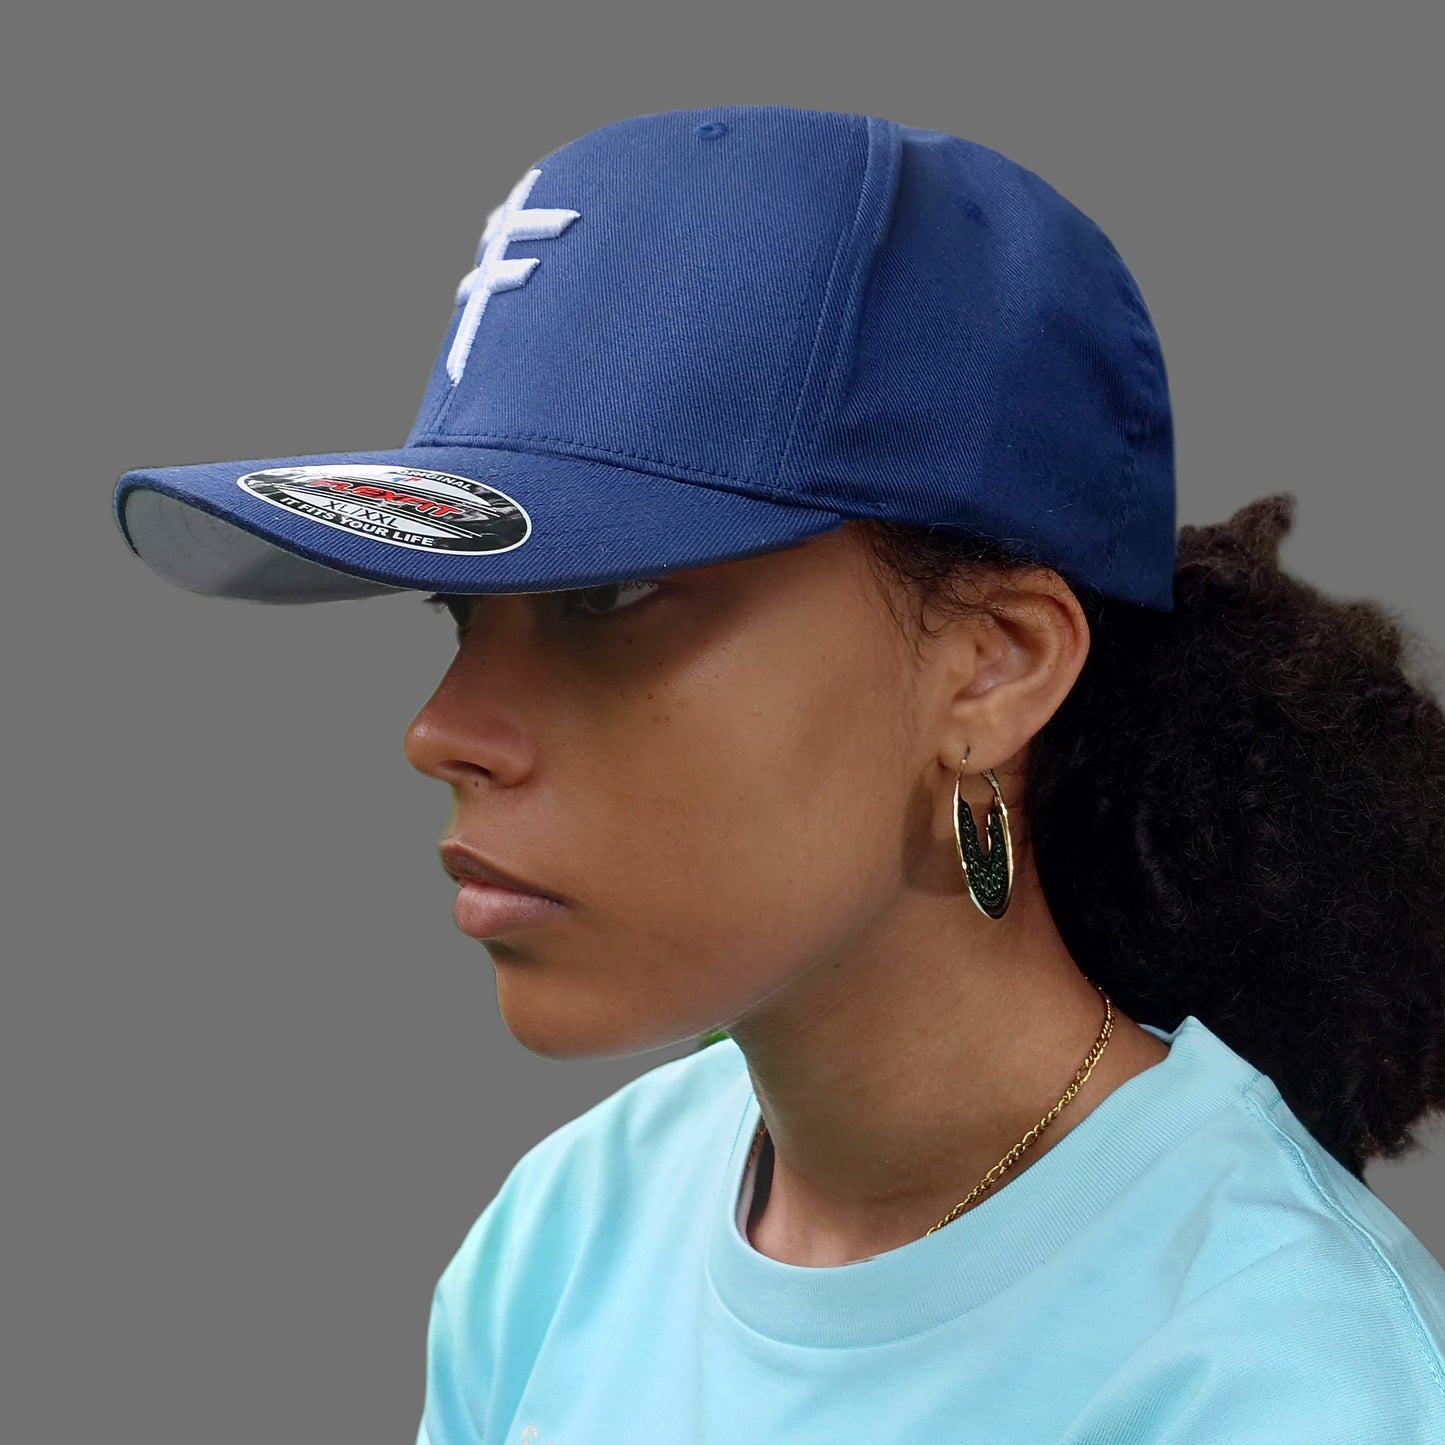 XL - XXL FITTED CAP - Blue & White